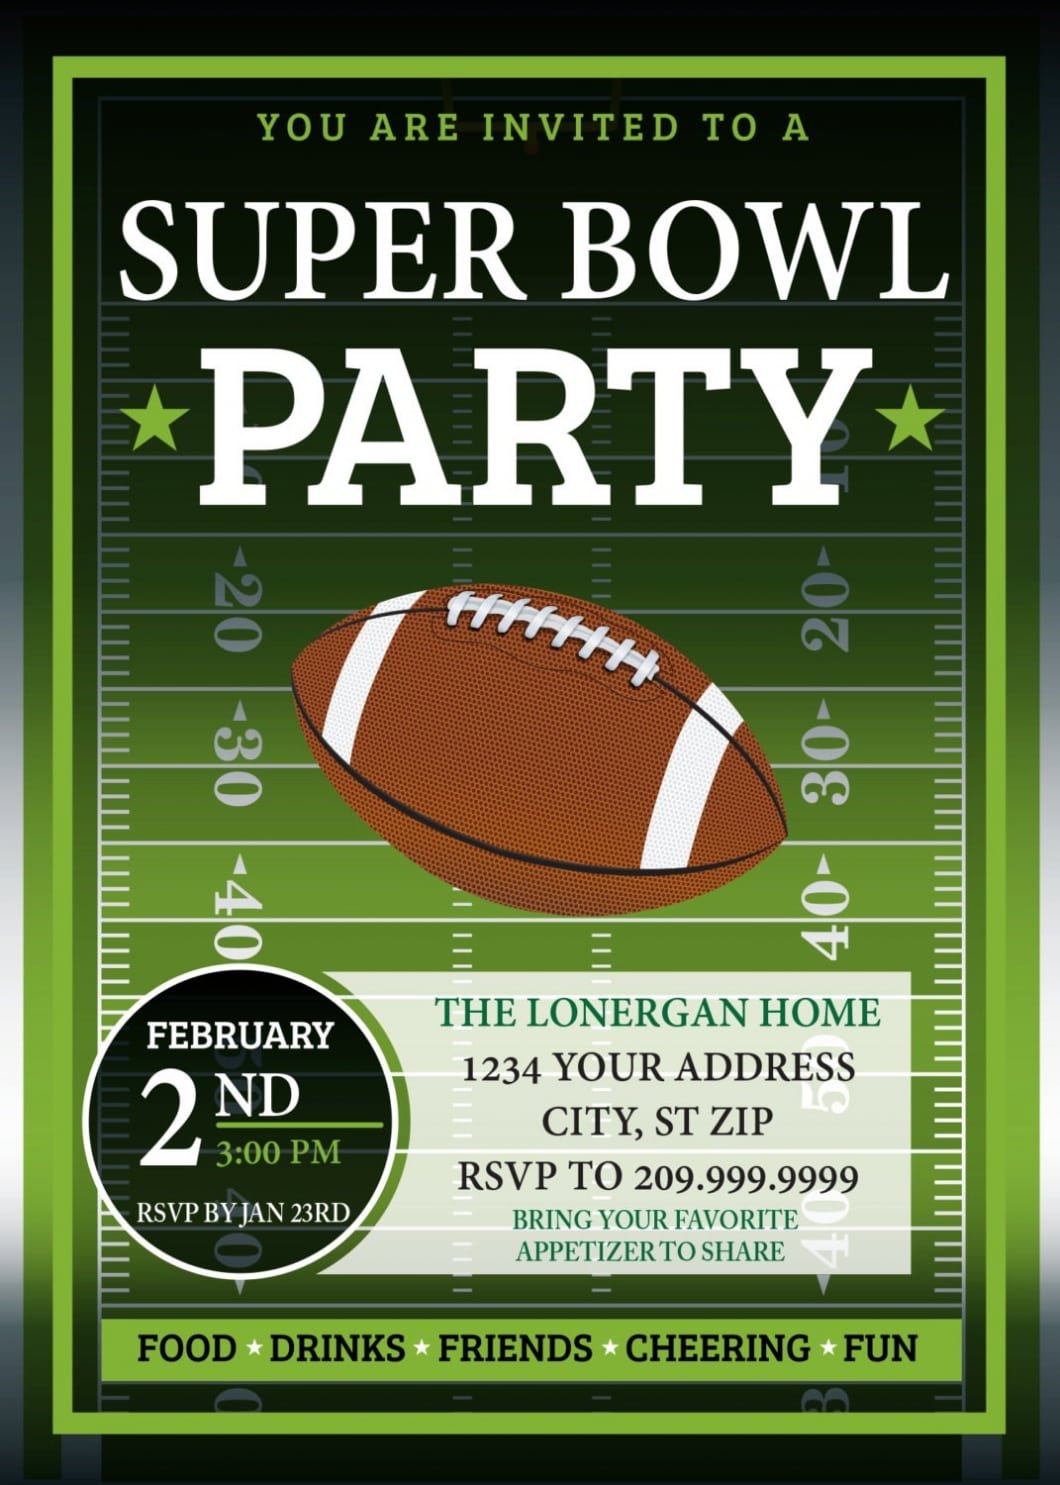 Super Bowl Party Invitations For You